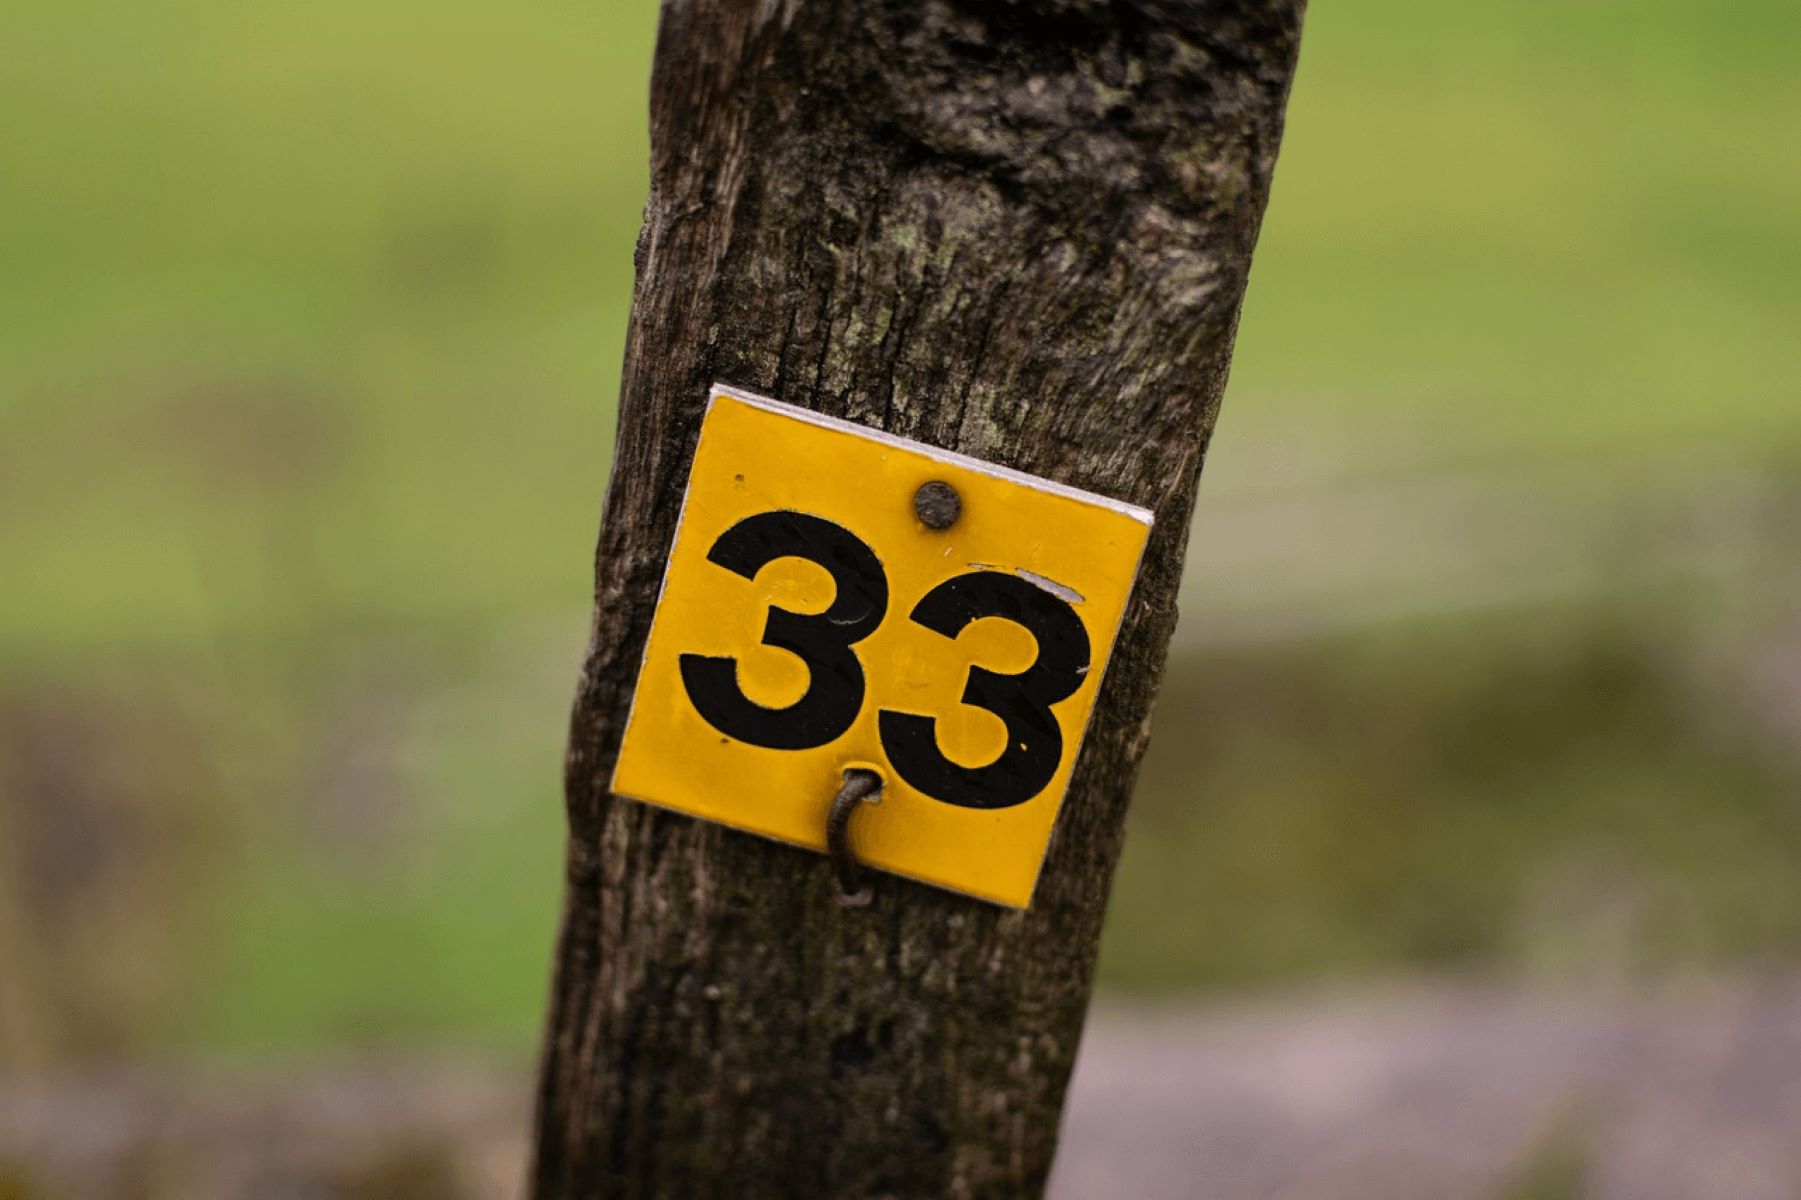 The Mysterious Significance Of The Number 33 Revealed - Why Is It Following You Everywhere?